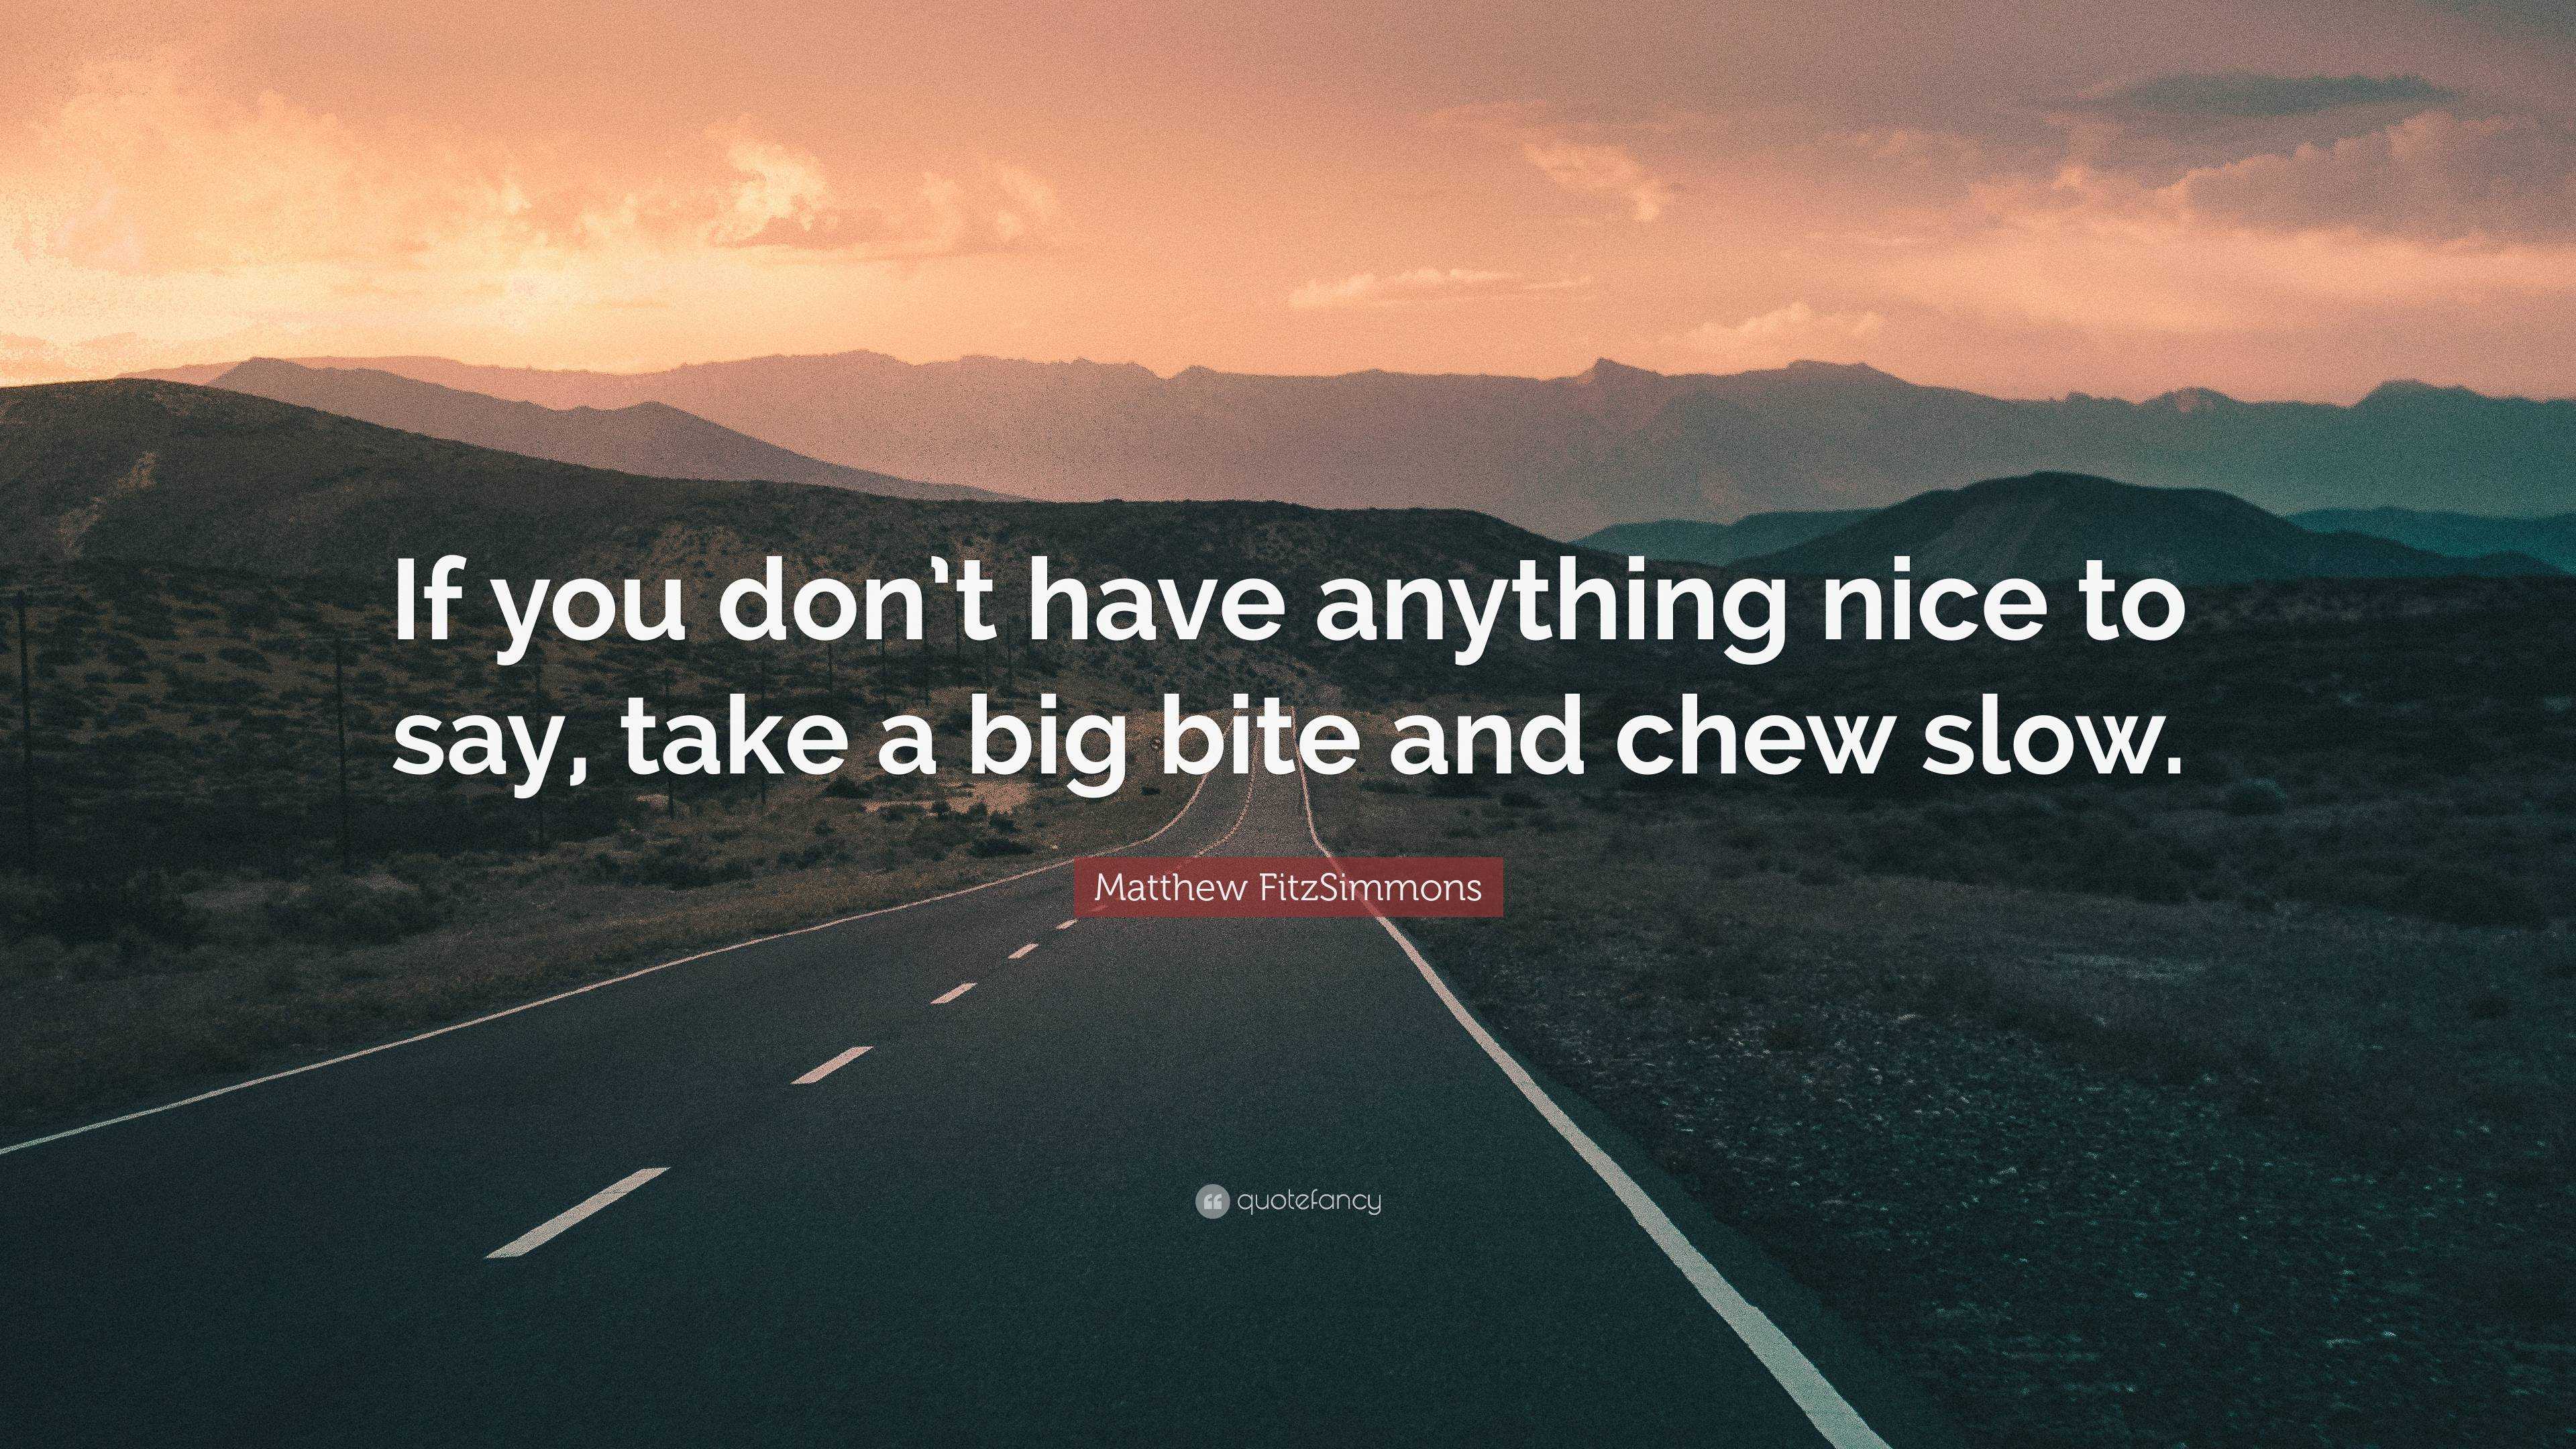 Matthew FitzSimmons Quote: “If you don't have anything nice to say